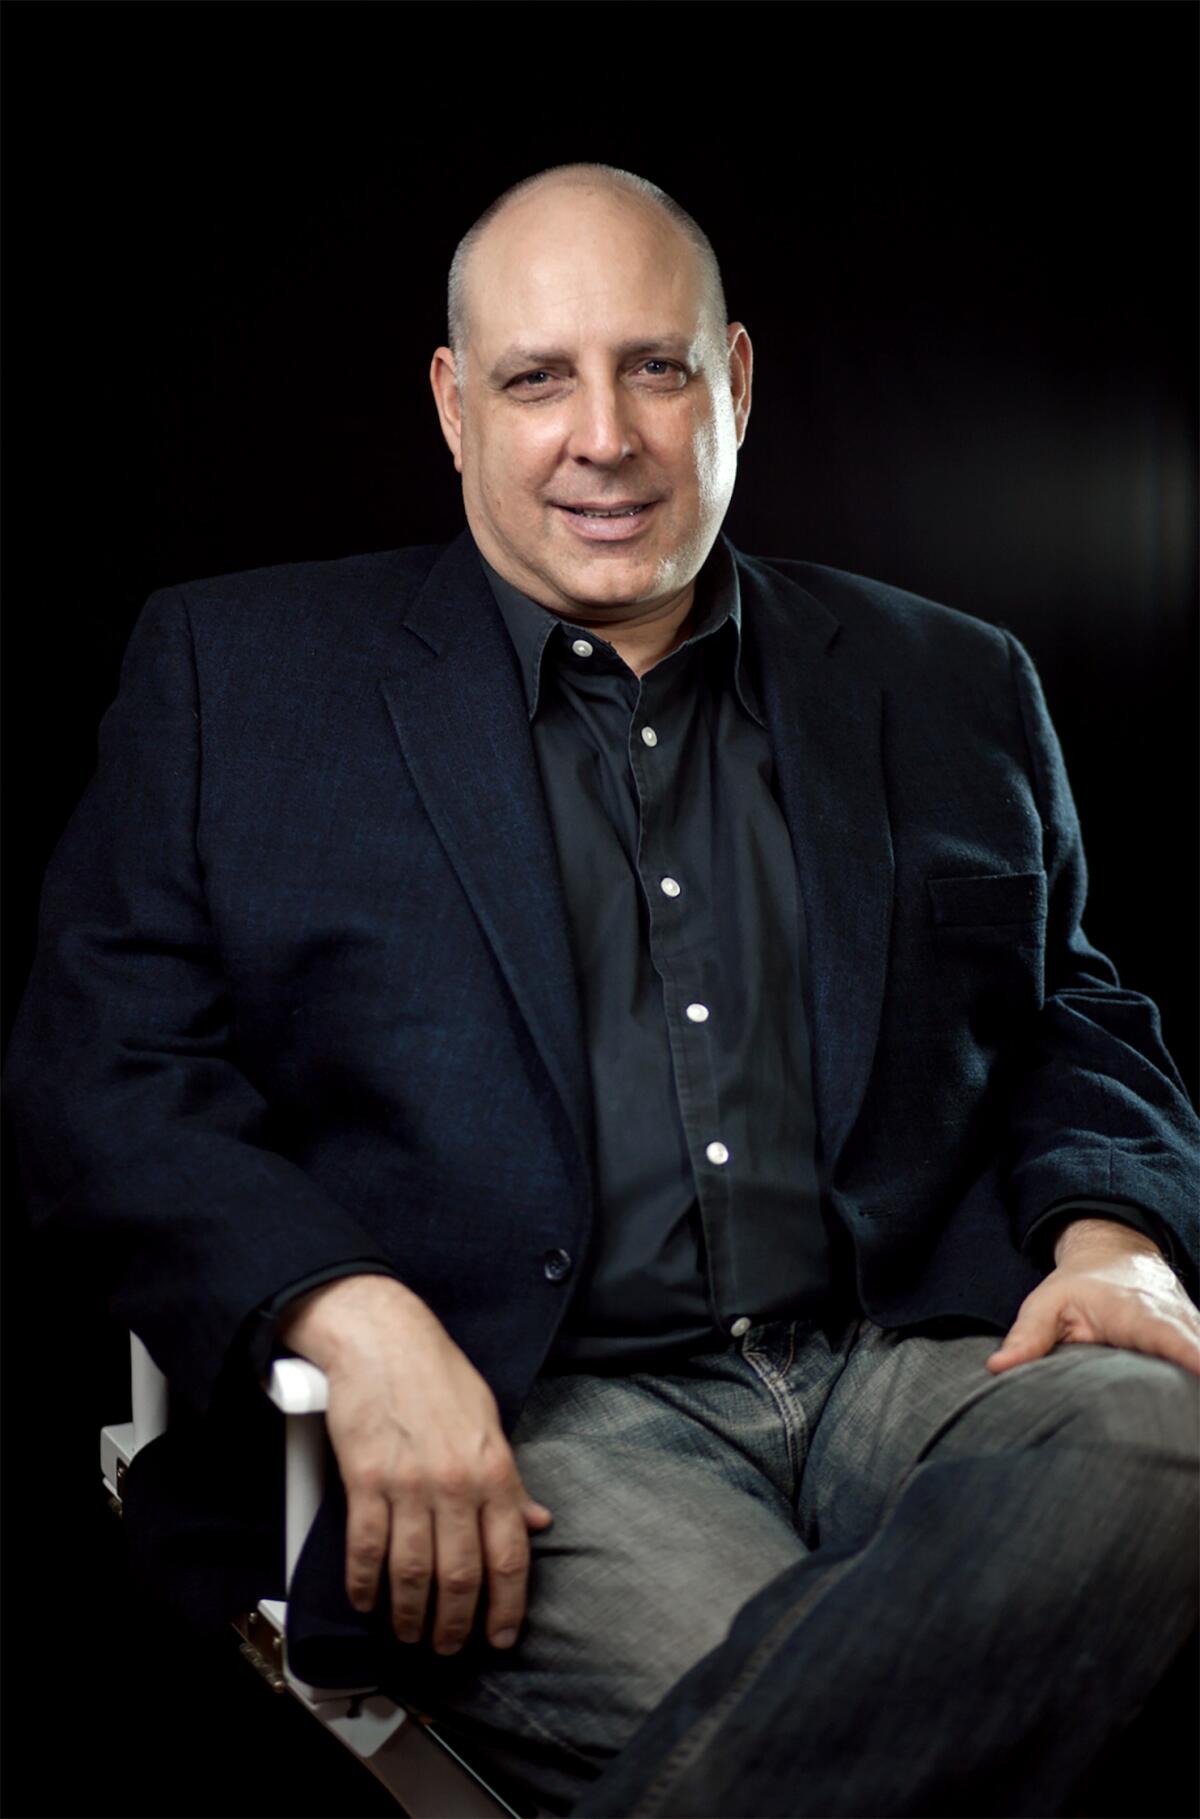 A seated, smiling bald man in a dark shirt and jacket.